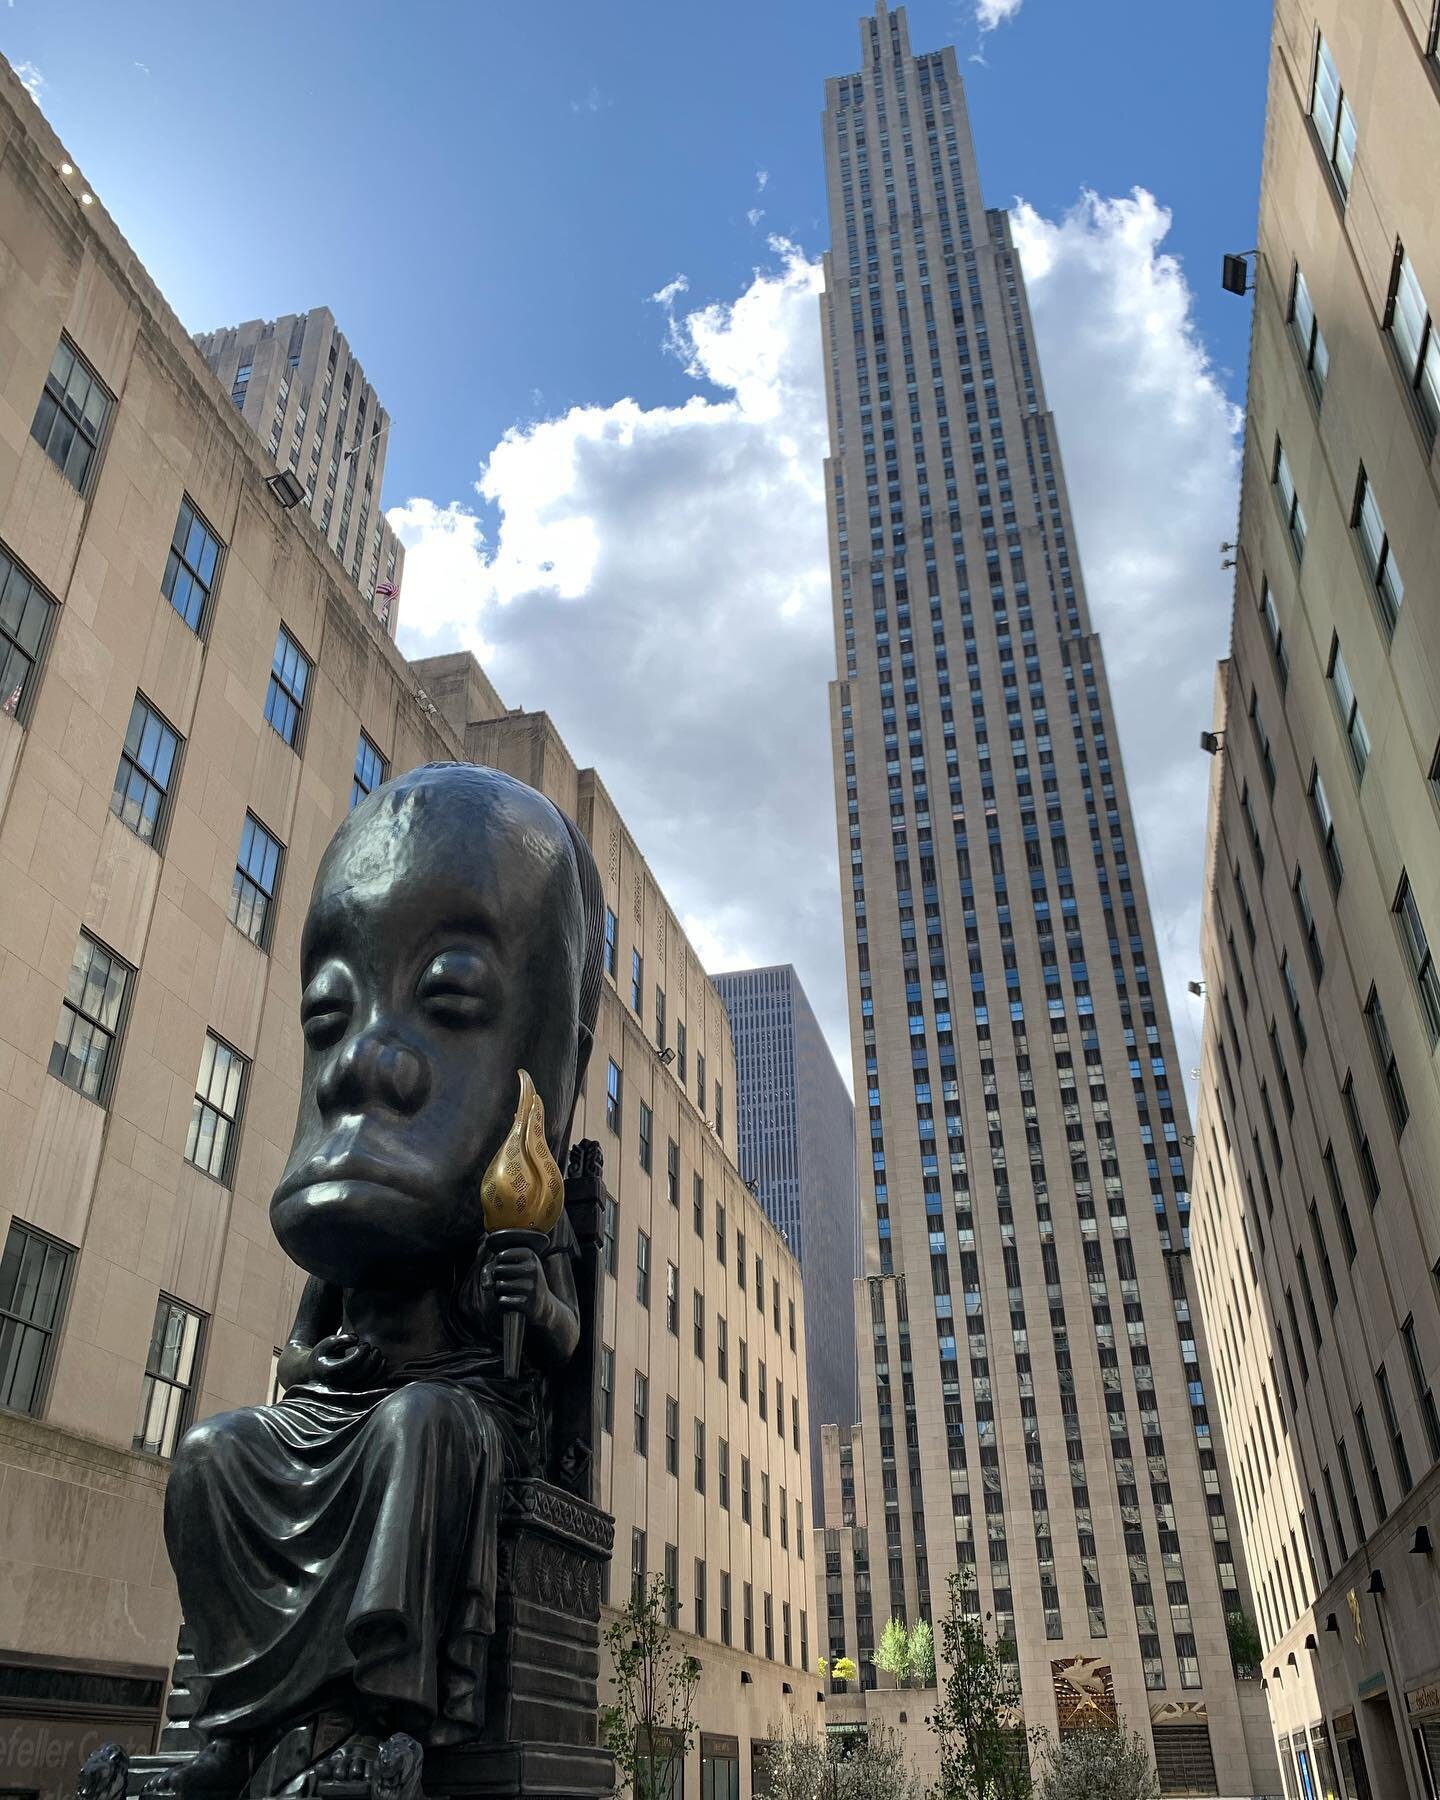 A monumental bronze sculpture by the Harlem-based artist Sanford Biggers was unveiled this month at Rockefeller Center. The work 'Oracle' continues the artist&rsquo;s recent Chimera series of sculptures, which combine elements of African and ancient 